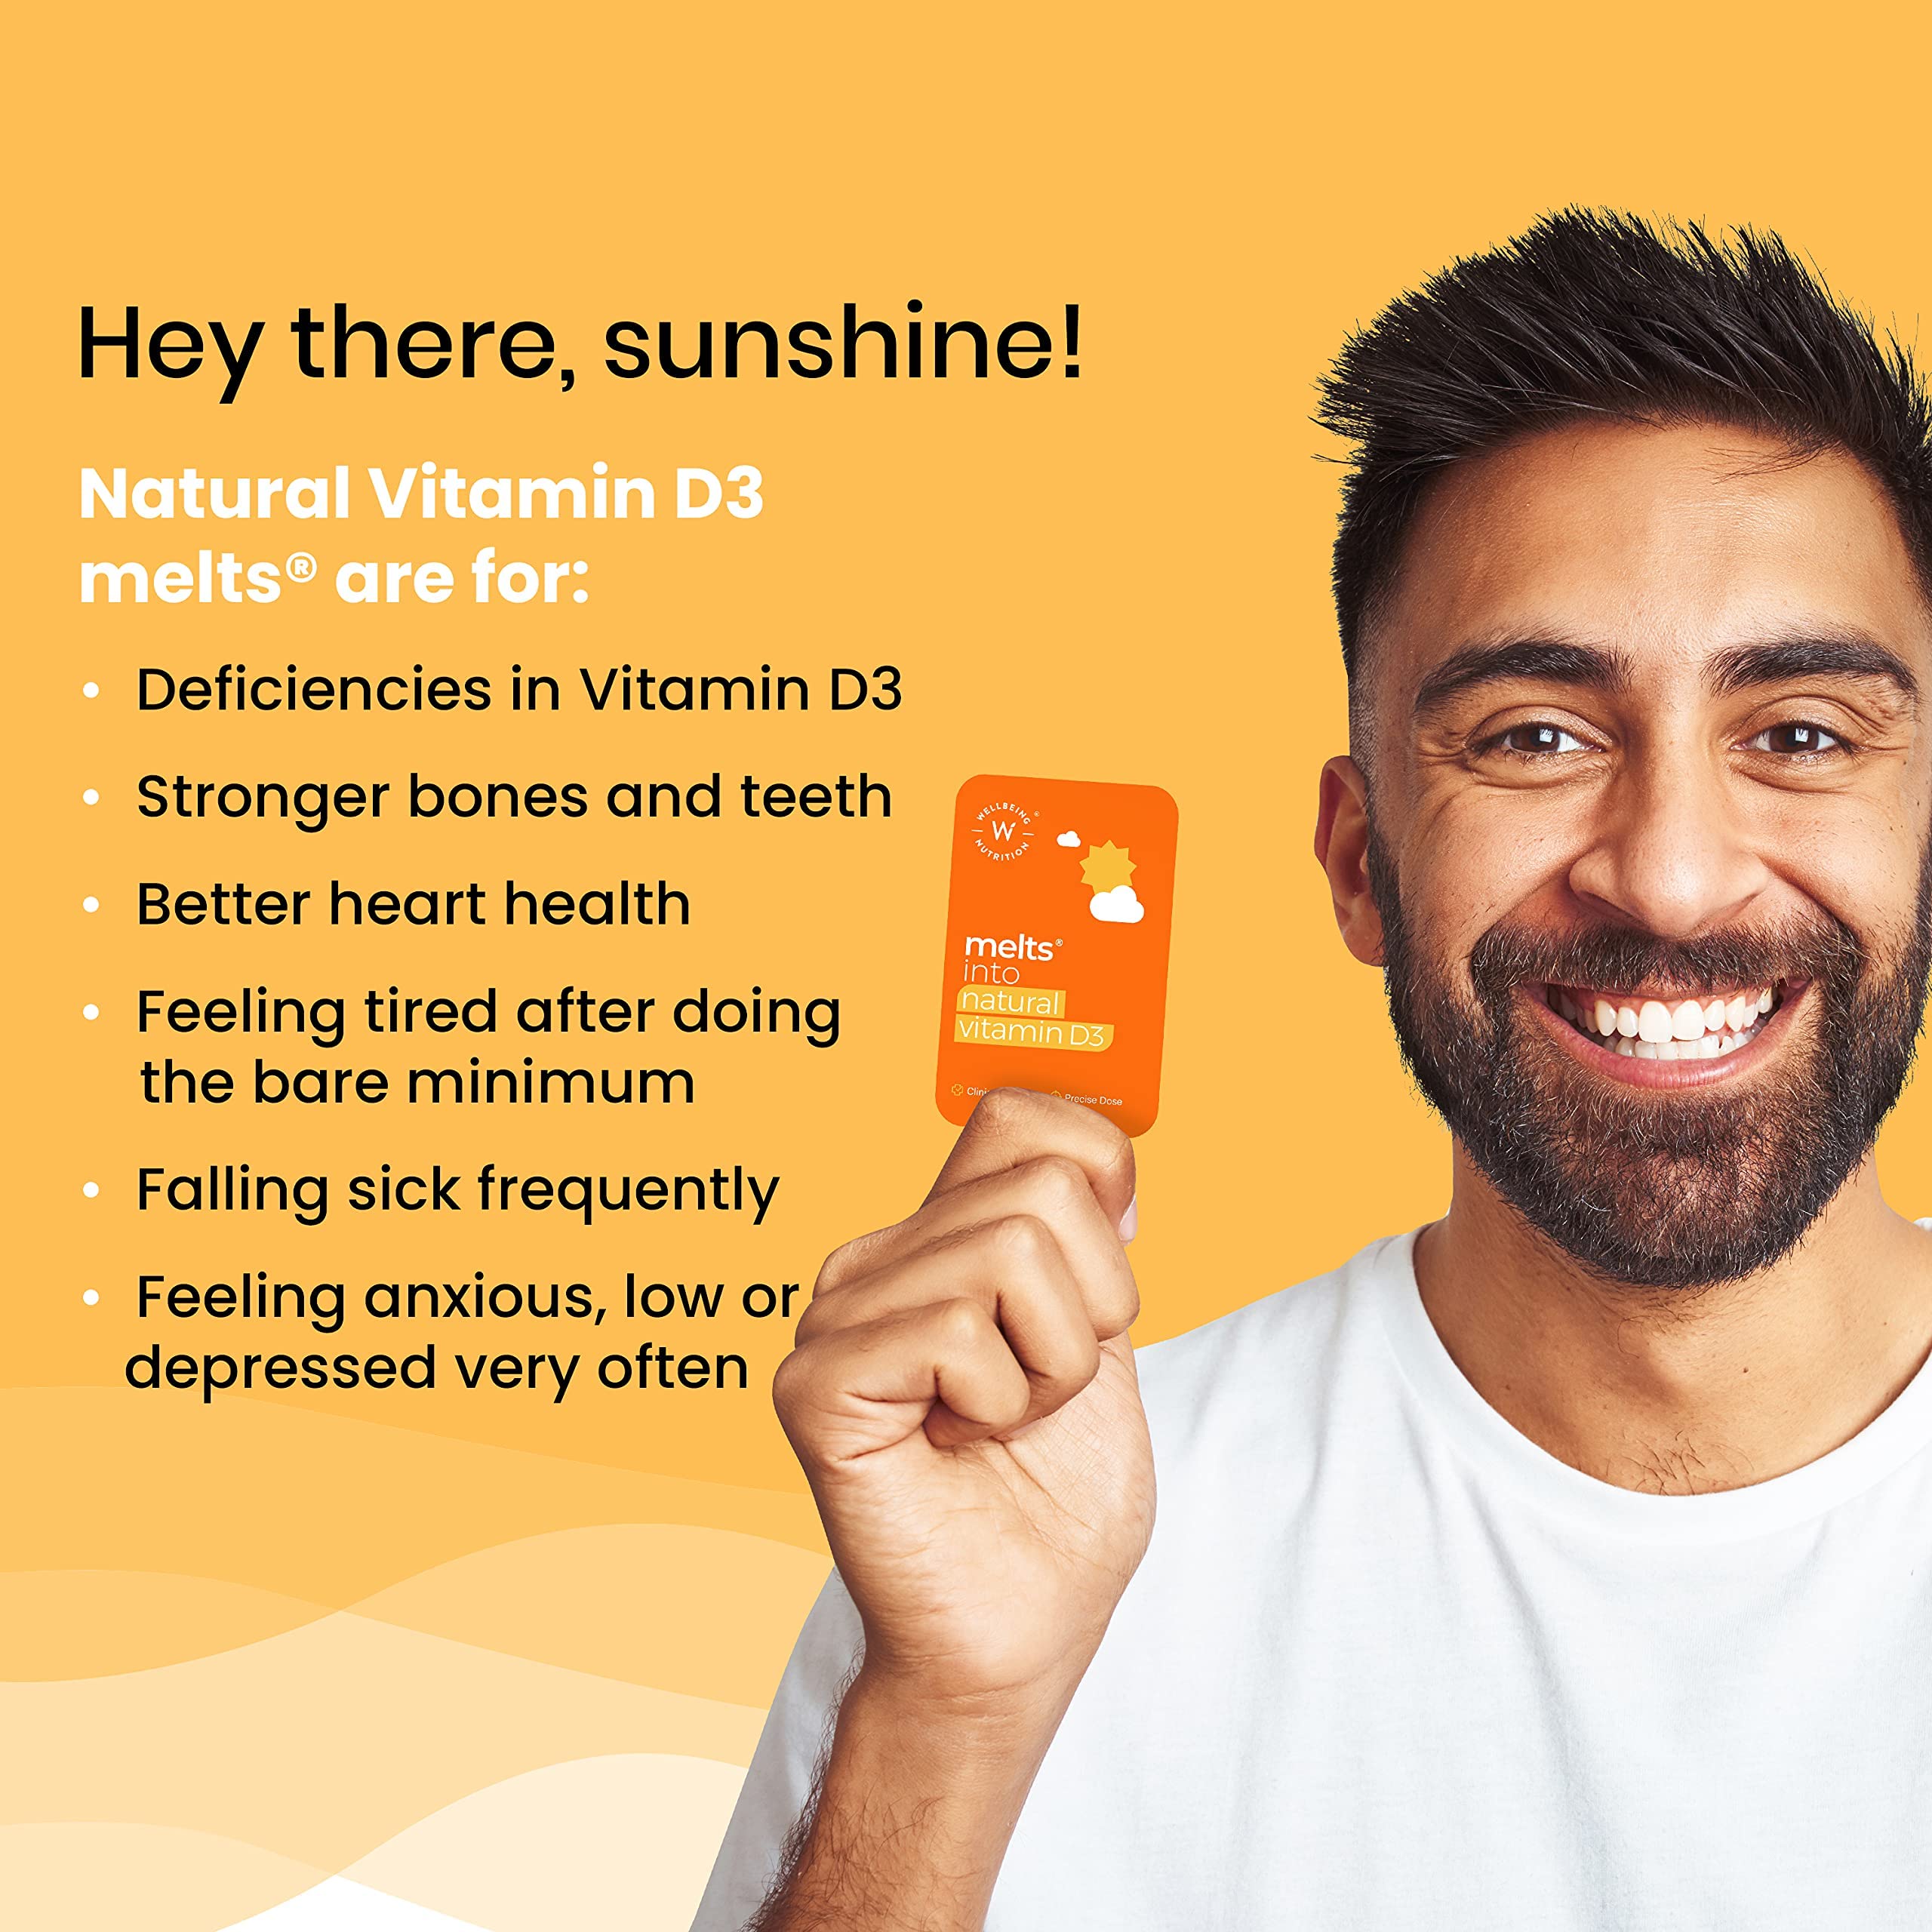 Wellbeing Nutrition Melts Natural Vitamin D3 + K2 (MK-7) with Organic Virgin Coconut Oil & Astaxanthin | Plant-Based & Vegan for Immunity, Heart, Muscle & Bone (30 Oral Strips)